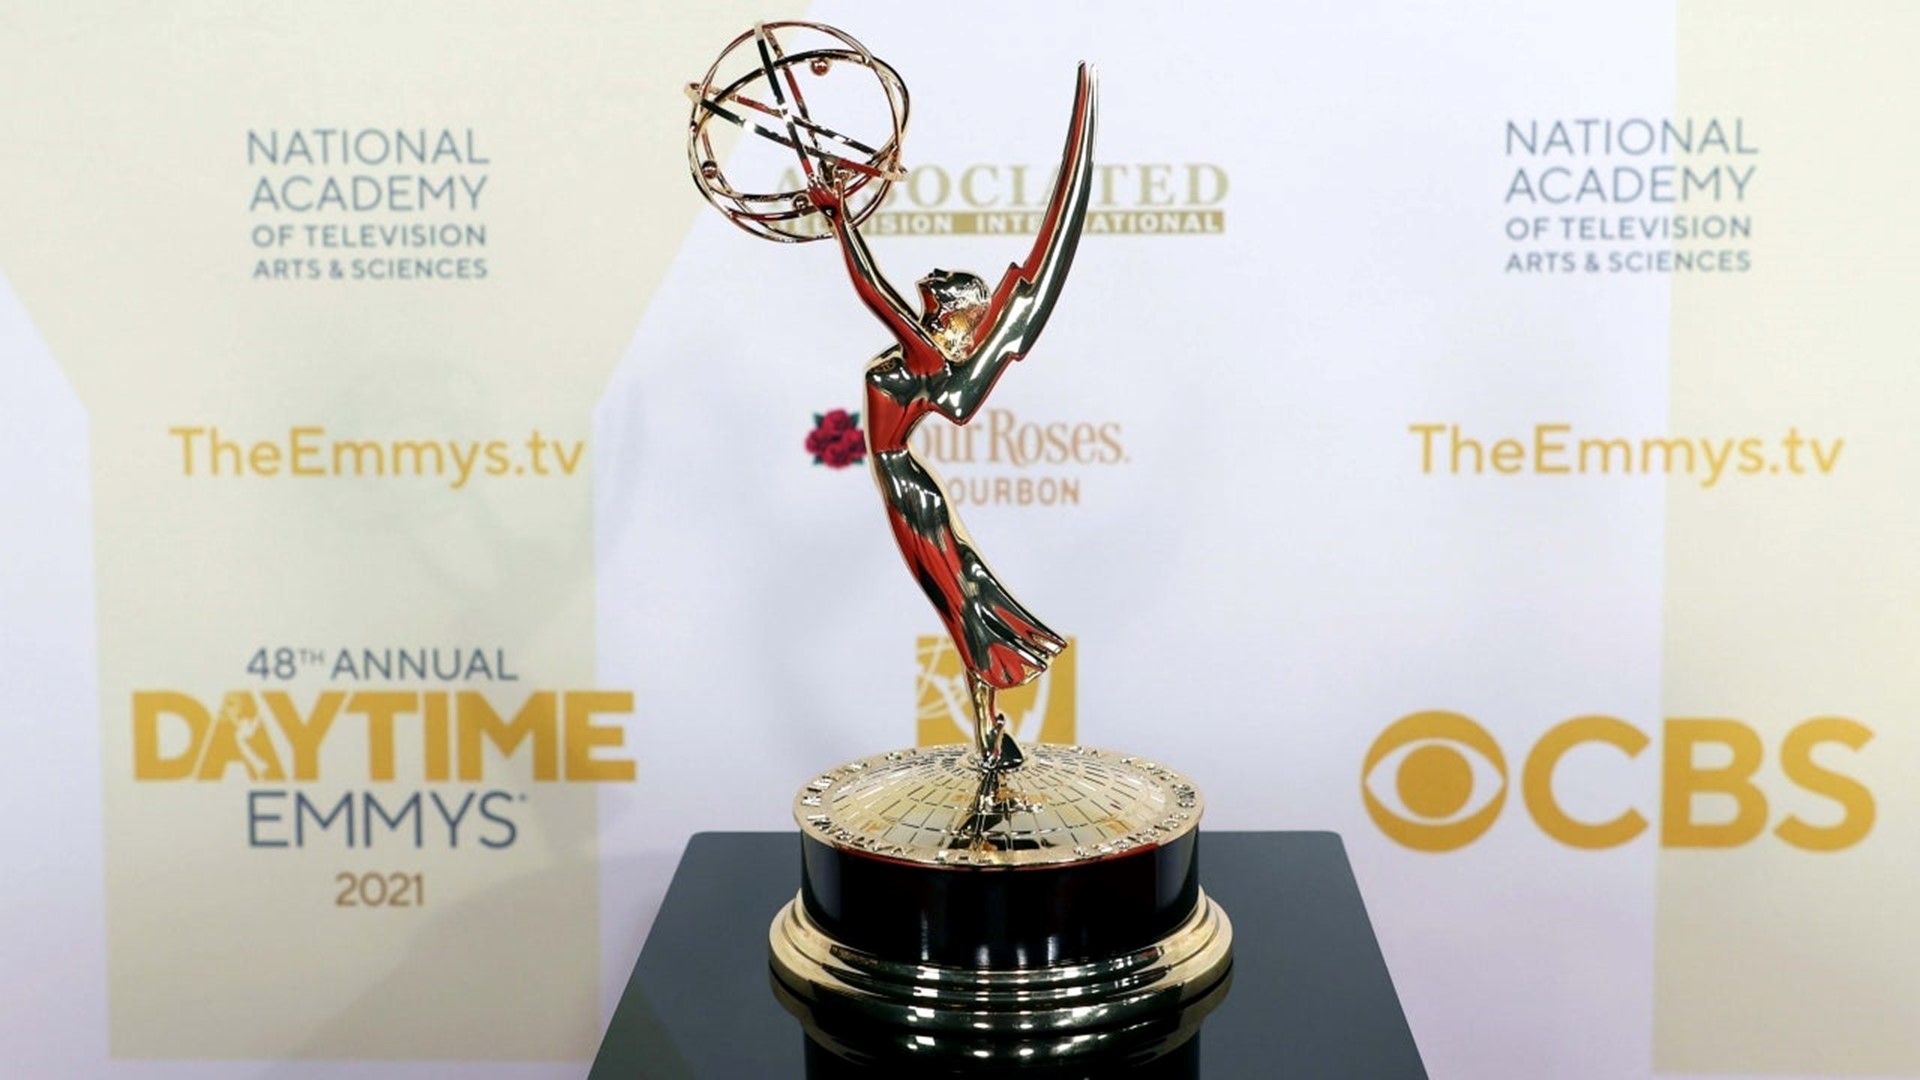 2021 Daytime Emmy Awards Complete List of Winners